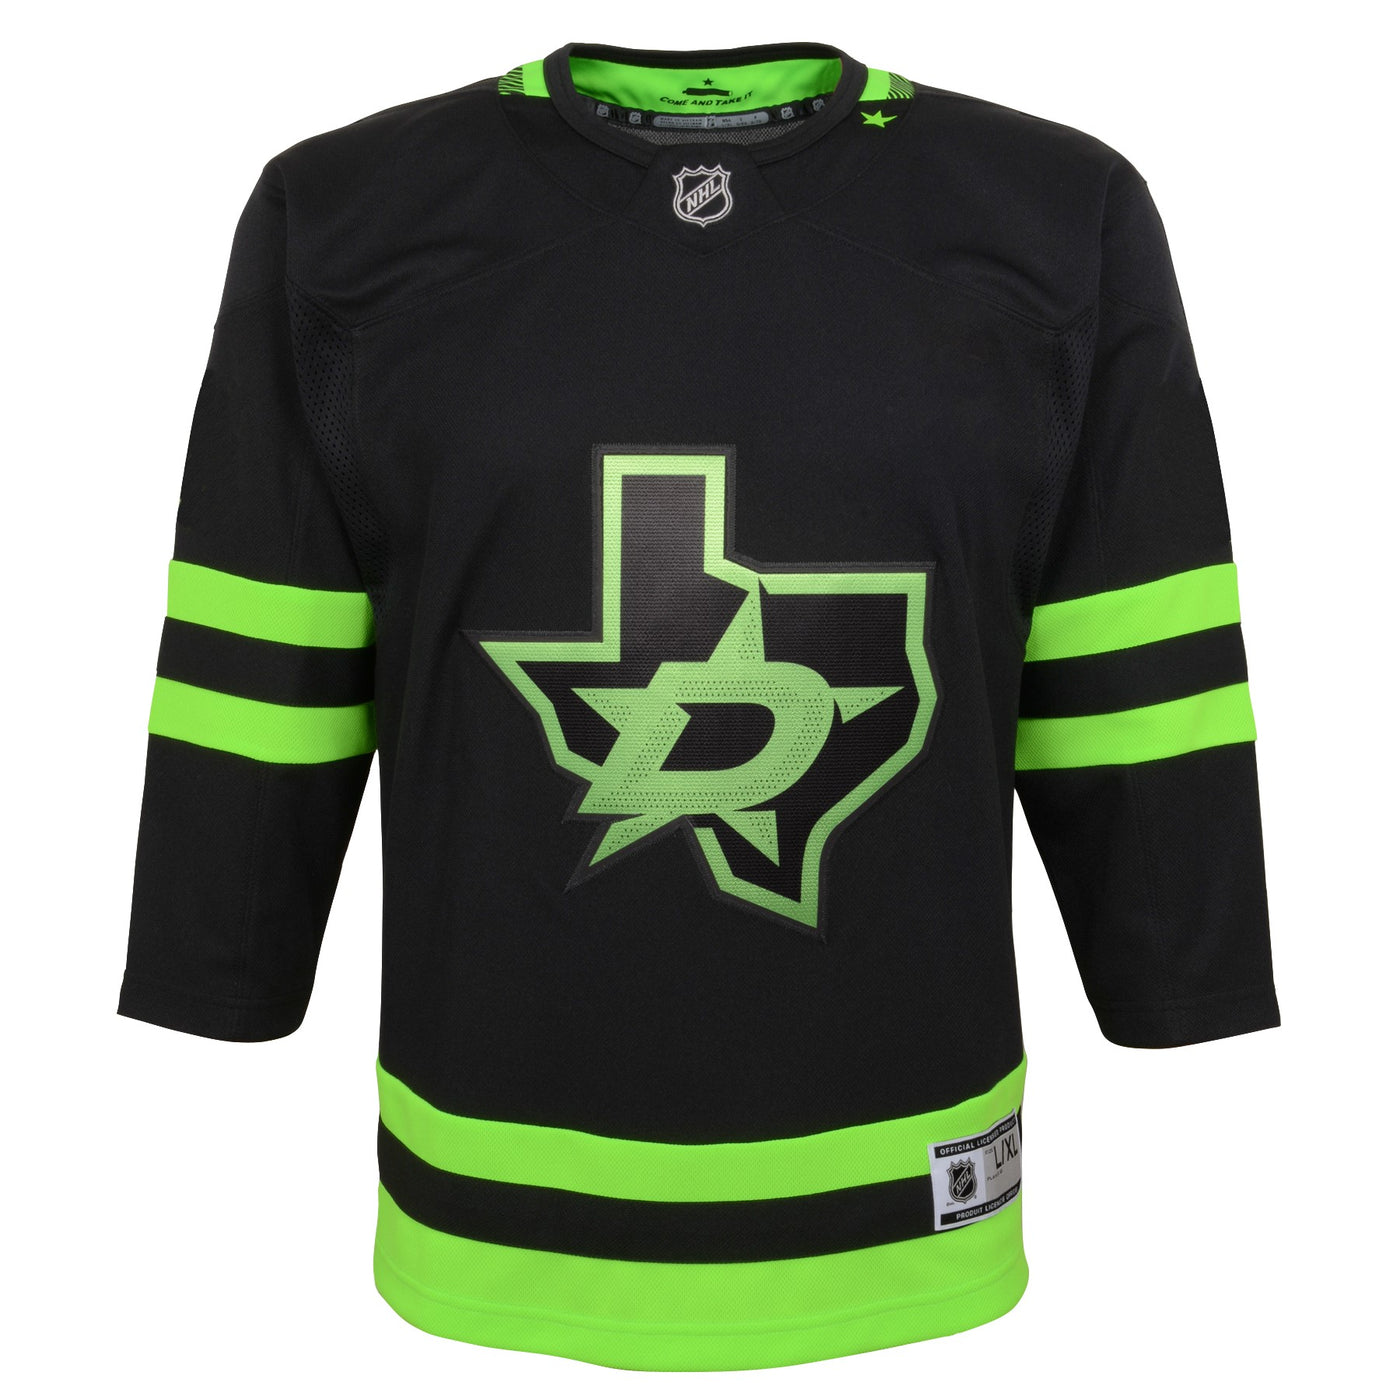 DALLAS STARS OUTERSTUFF YOUTH BLACKOUT 3RD PREMIER JERSEY - FRONT VIEW